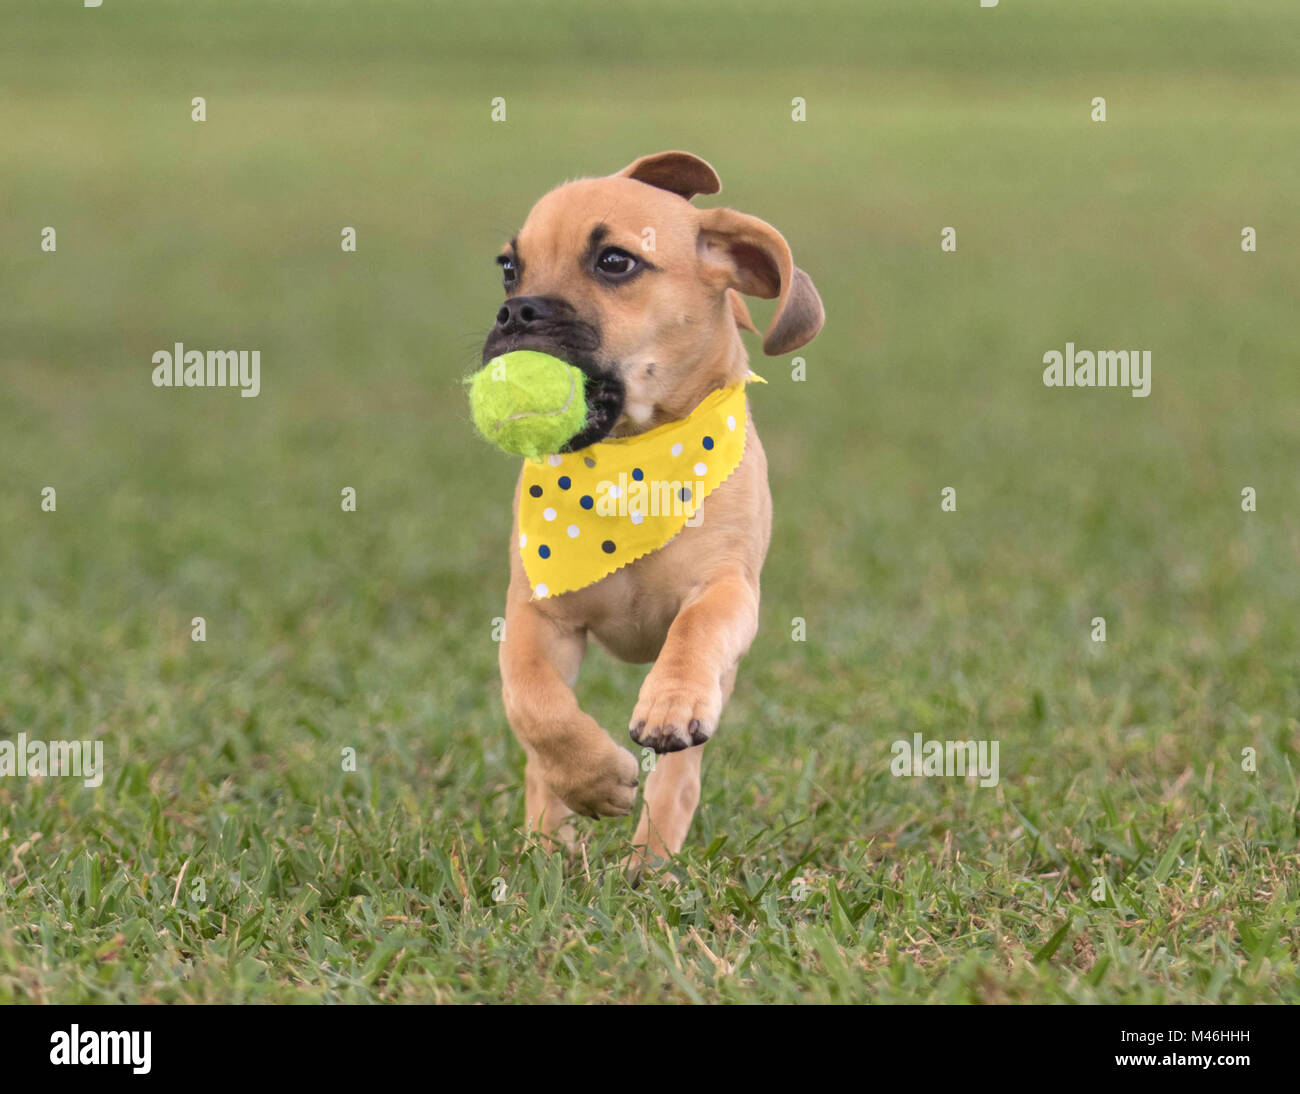 Adorable puppy runing on grass toward camera with ball in mouth Stock Photo